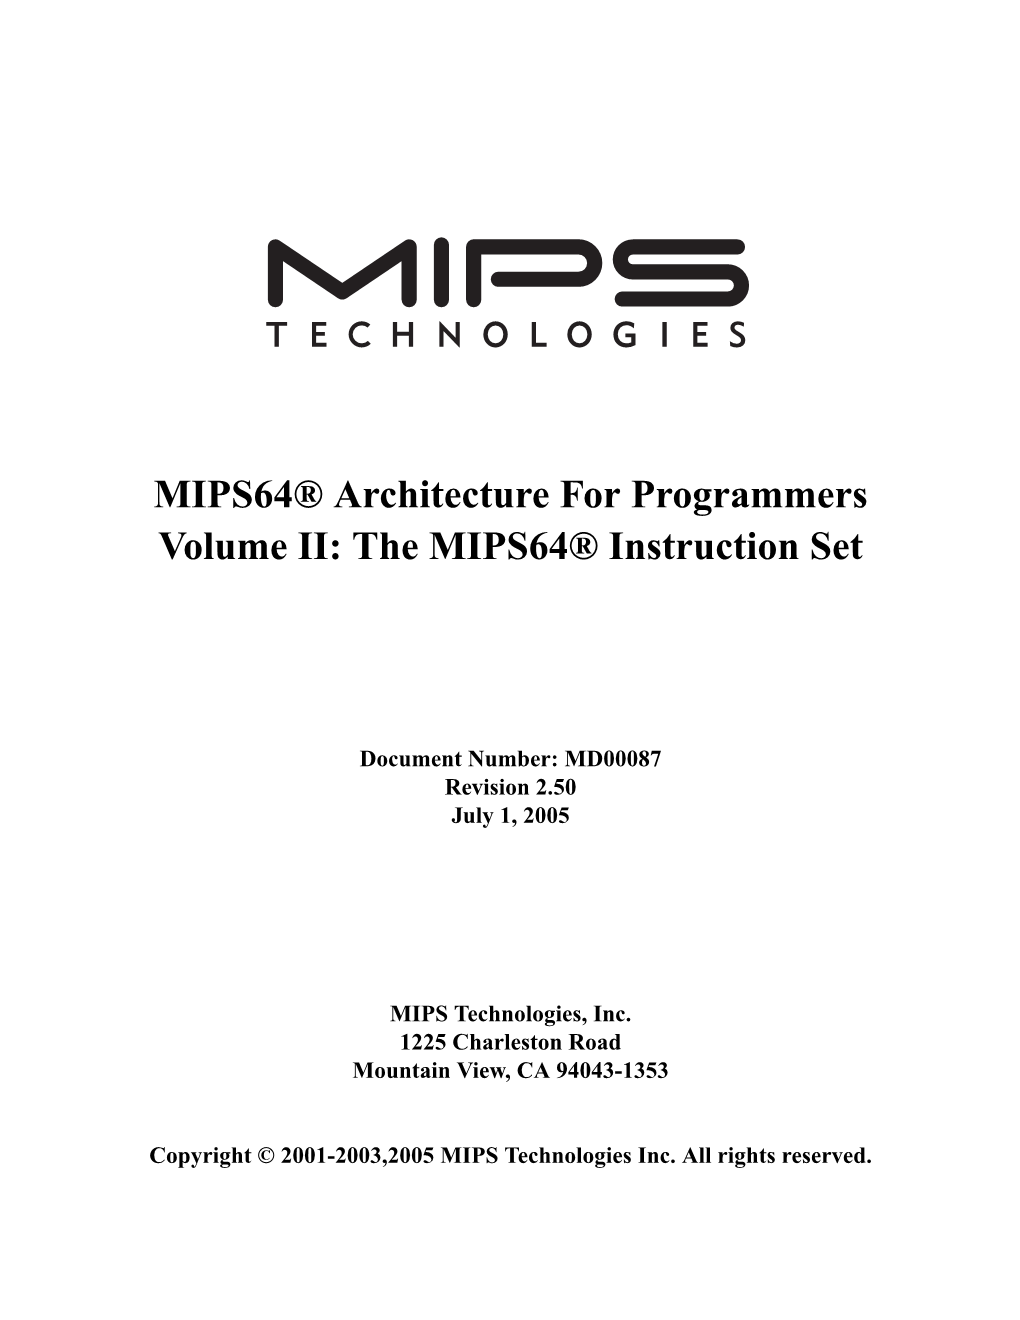 MIPS64® Architecture for Programmers Volume II: the MIPS64® Instruction